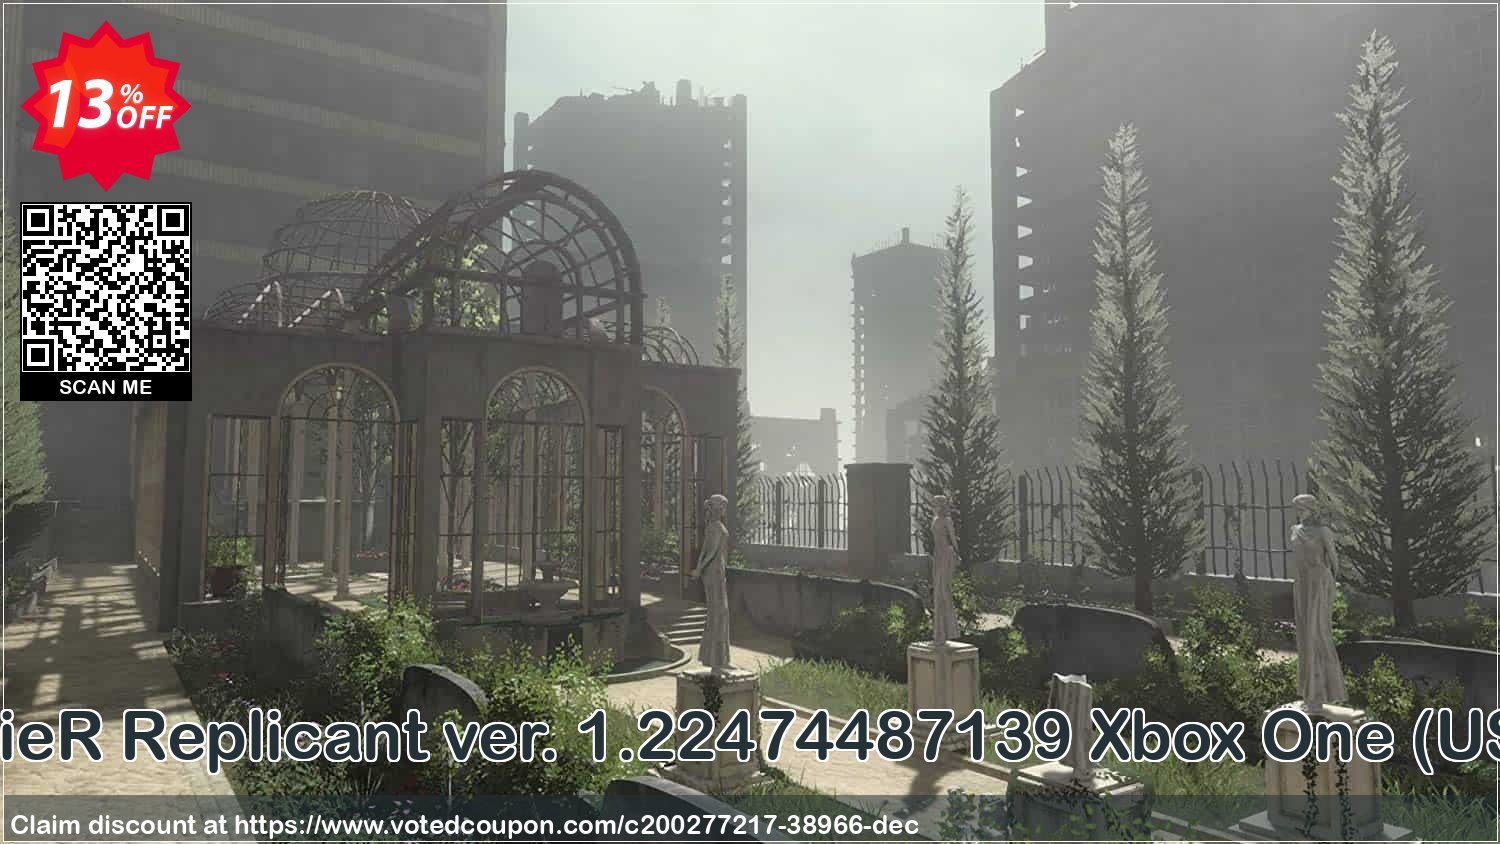 NieR Replicant ver. 1.22474487139 Xbox One, US  Coupon Code Apr 2024, 13% OFF - VotedCoupon